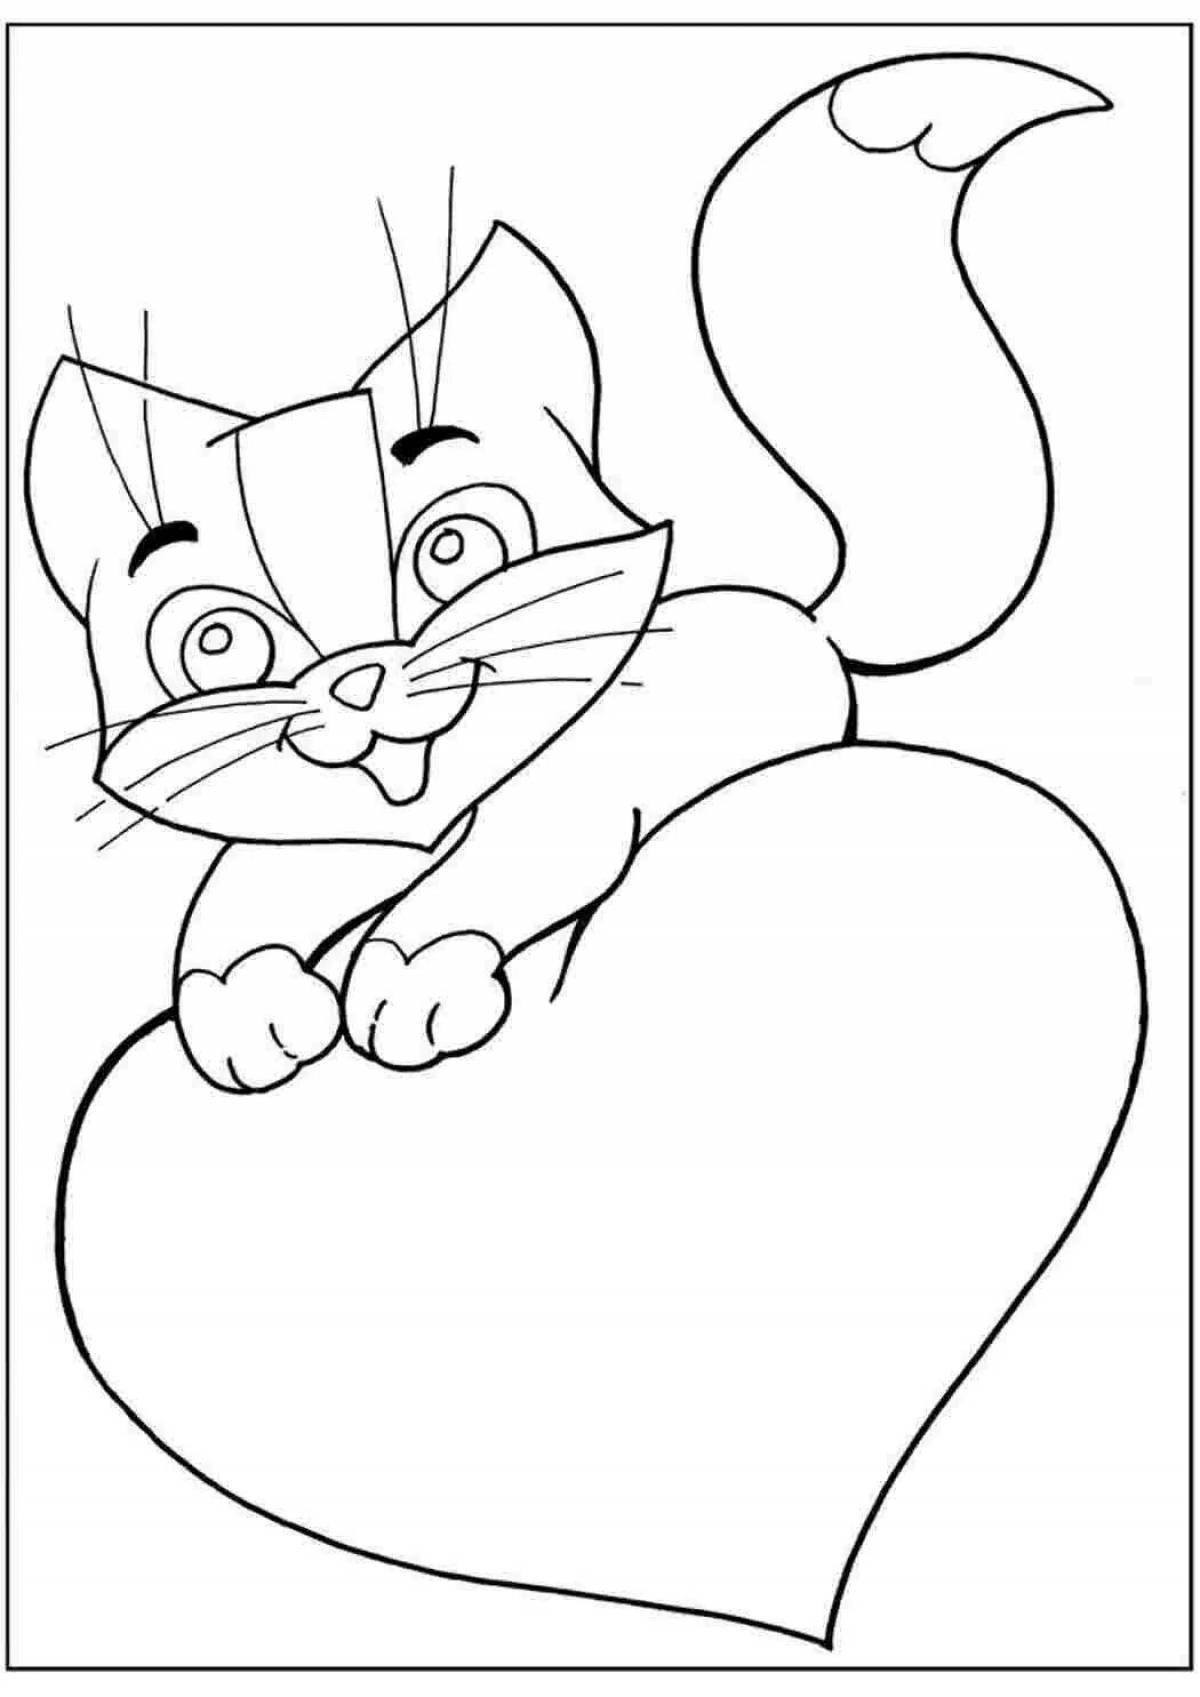 Intriguing lung seal coloring page